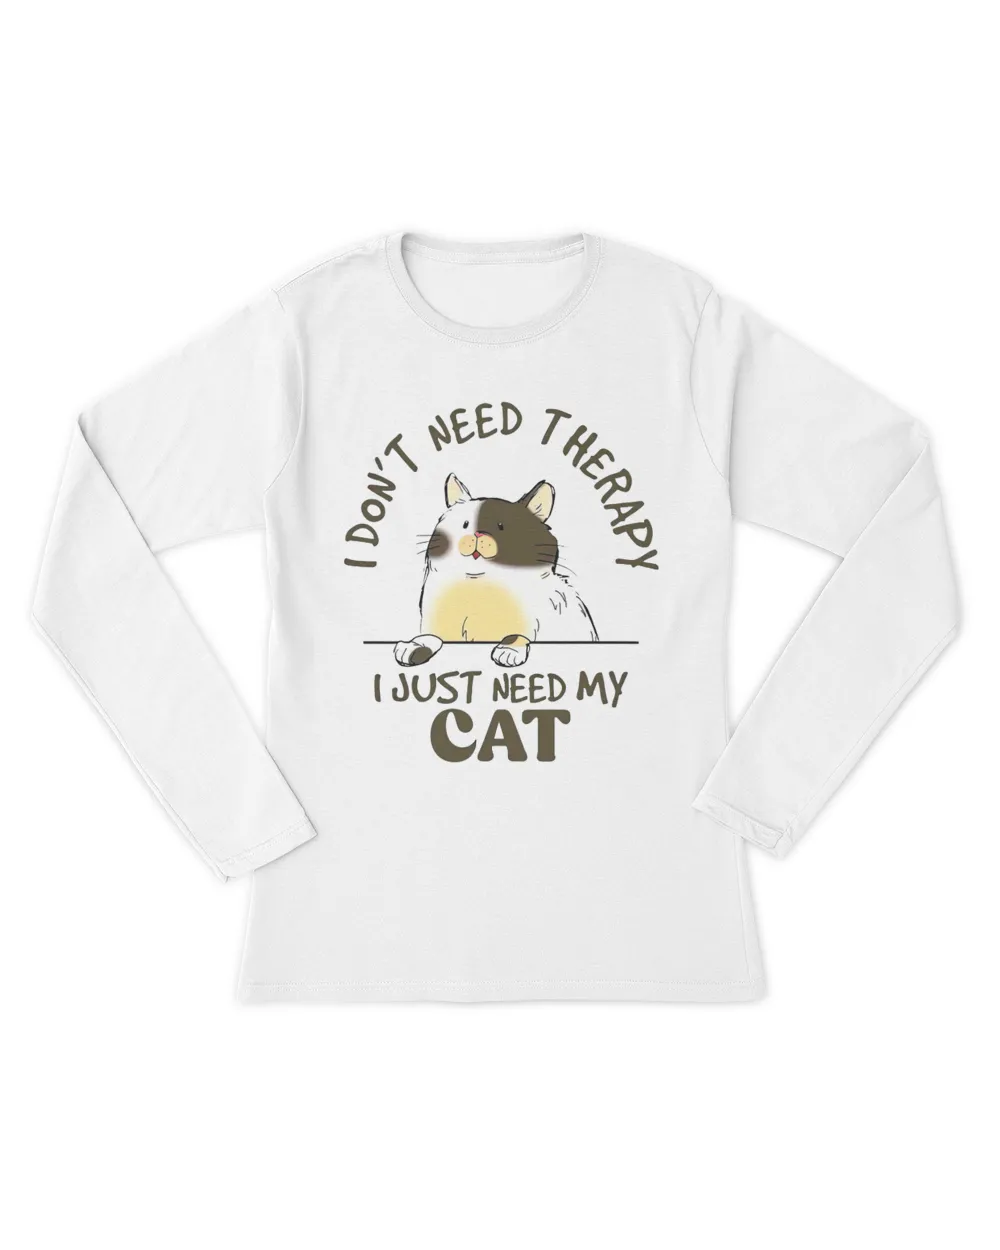 I dont't need therapy QTCAT051222A16